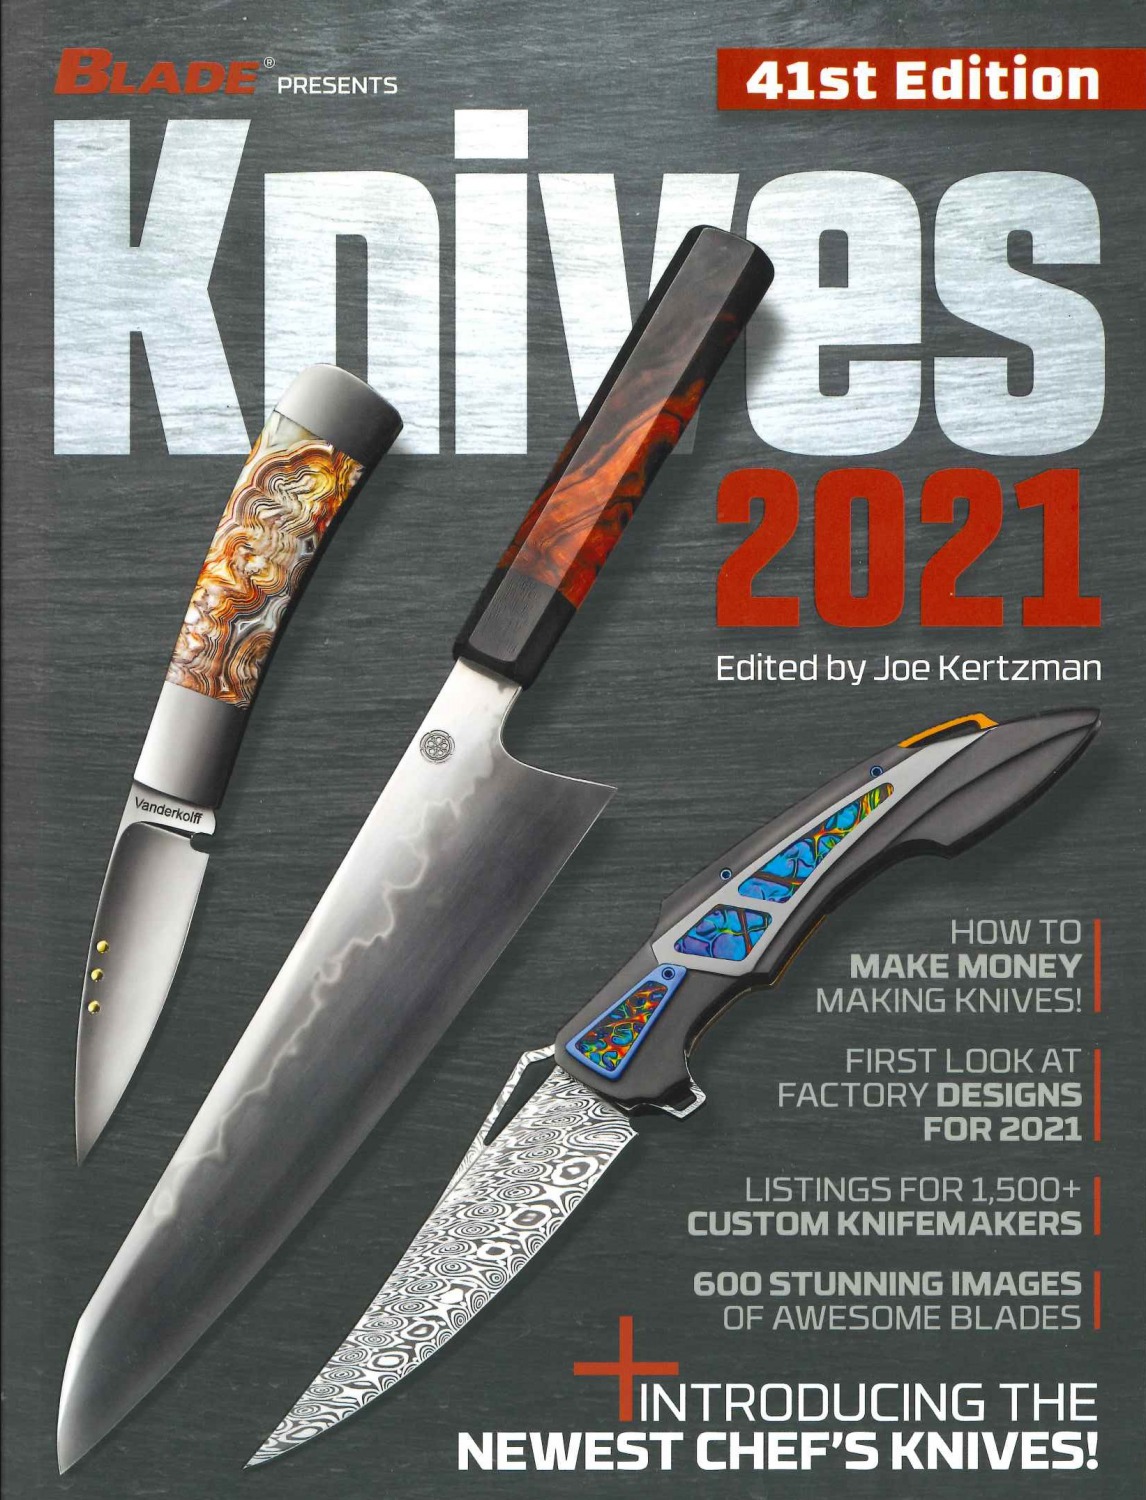 book_collection_knives2021